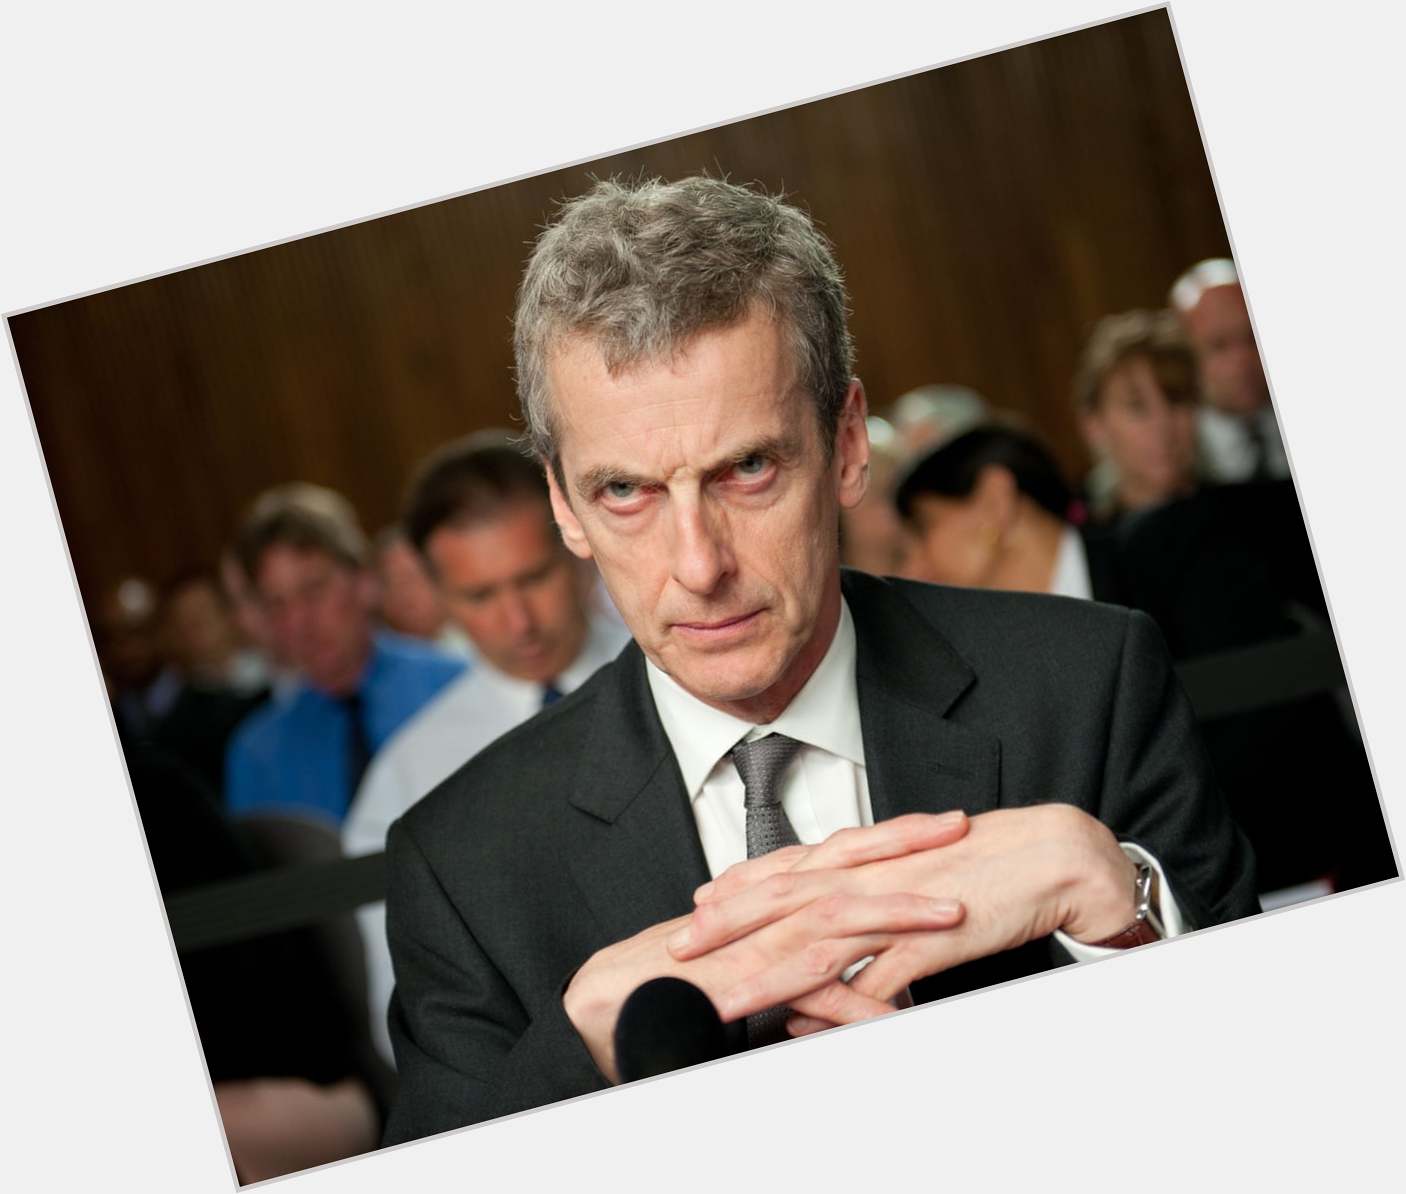 Happy birthday to Peter Capaldi who is 63 today 